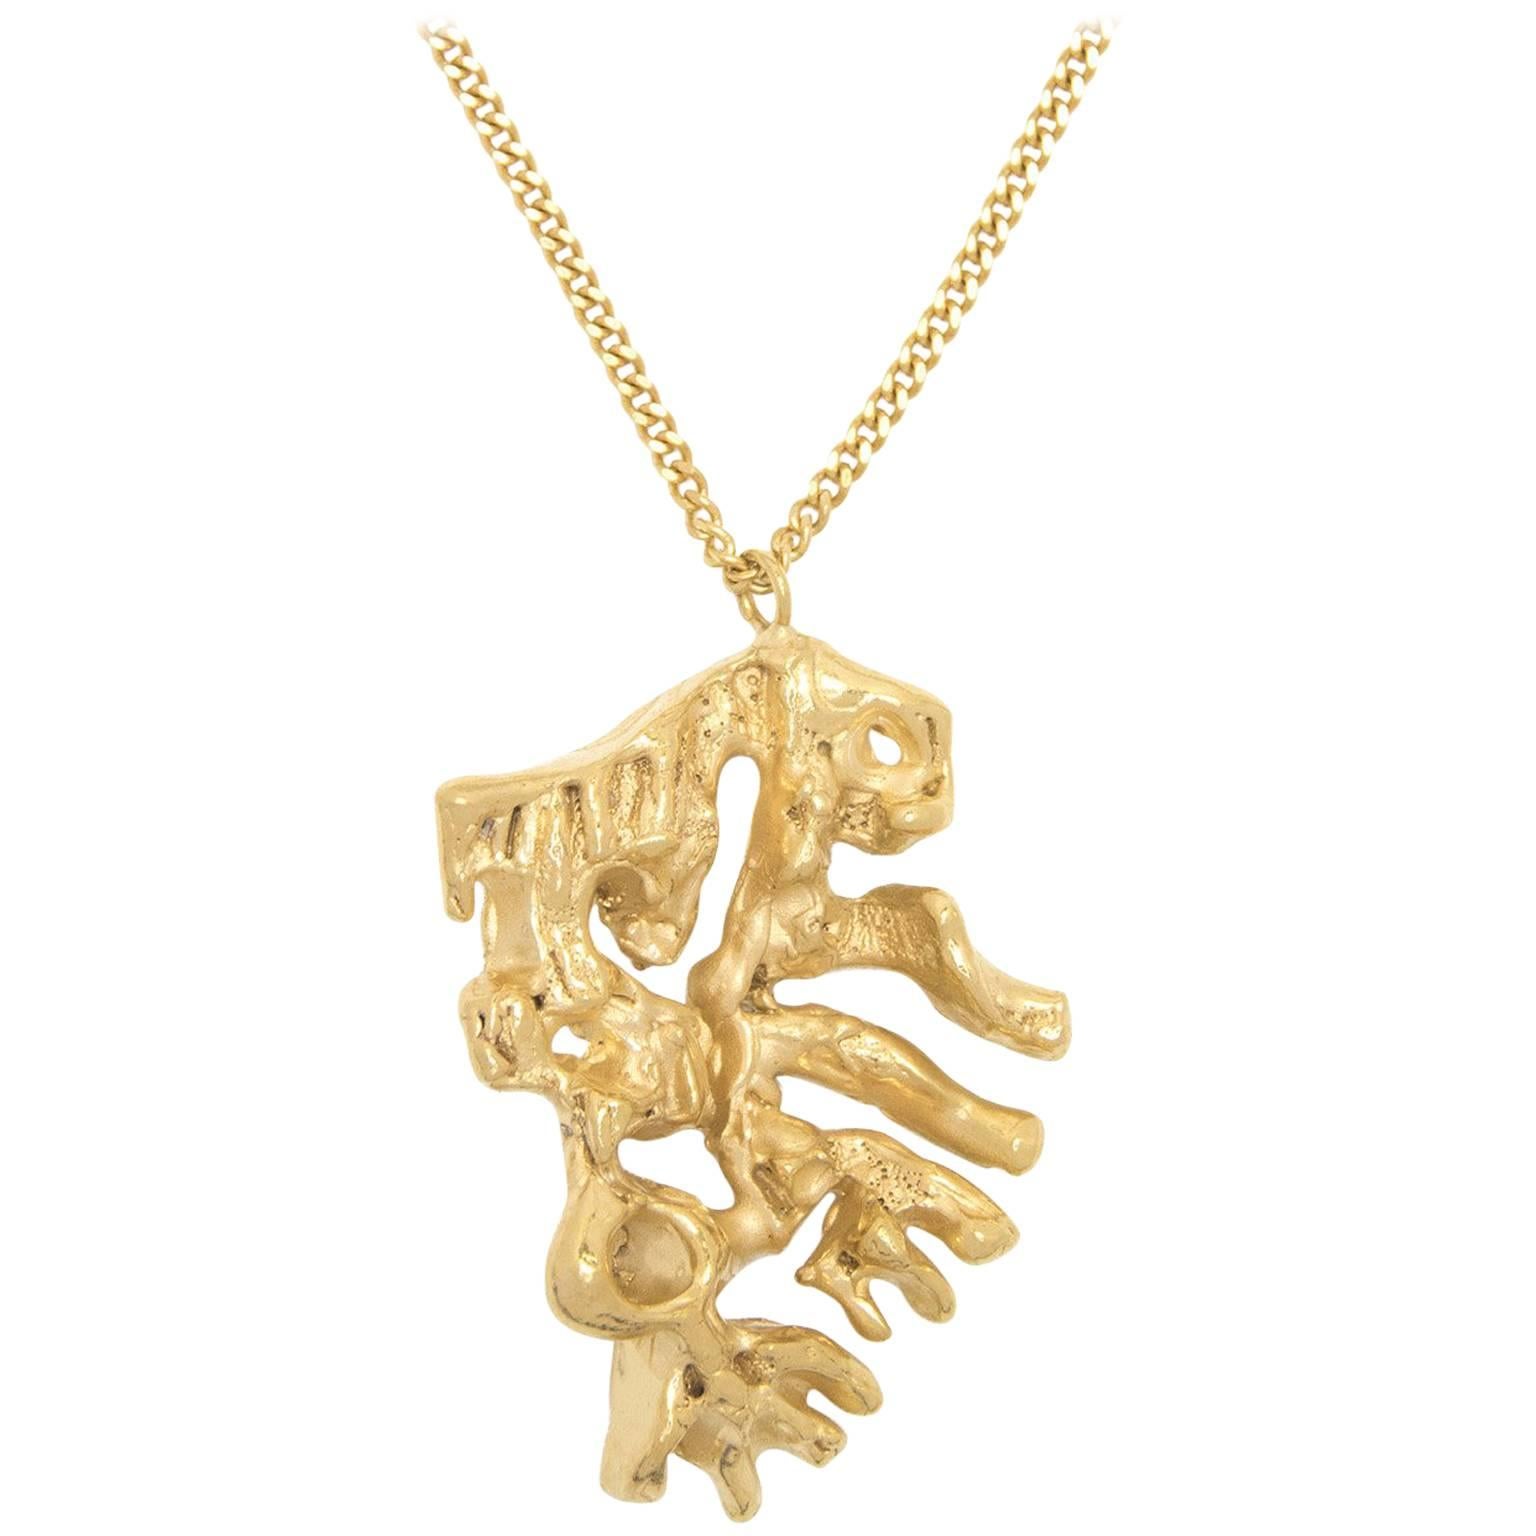 Loveness Lee Chinese Zodiac Rooster, Chicken Horoscope Gold Pendant Necklace For Sale